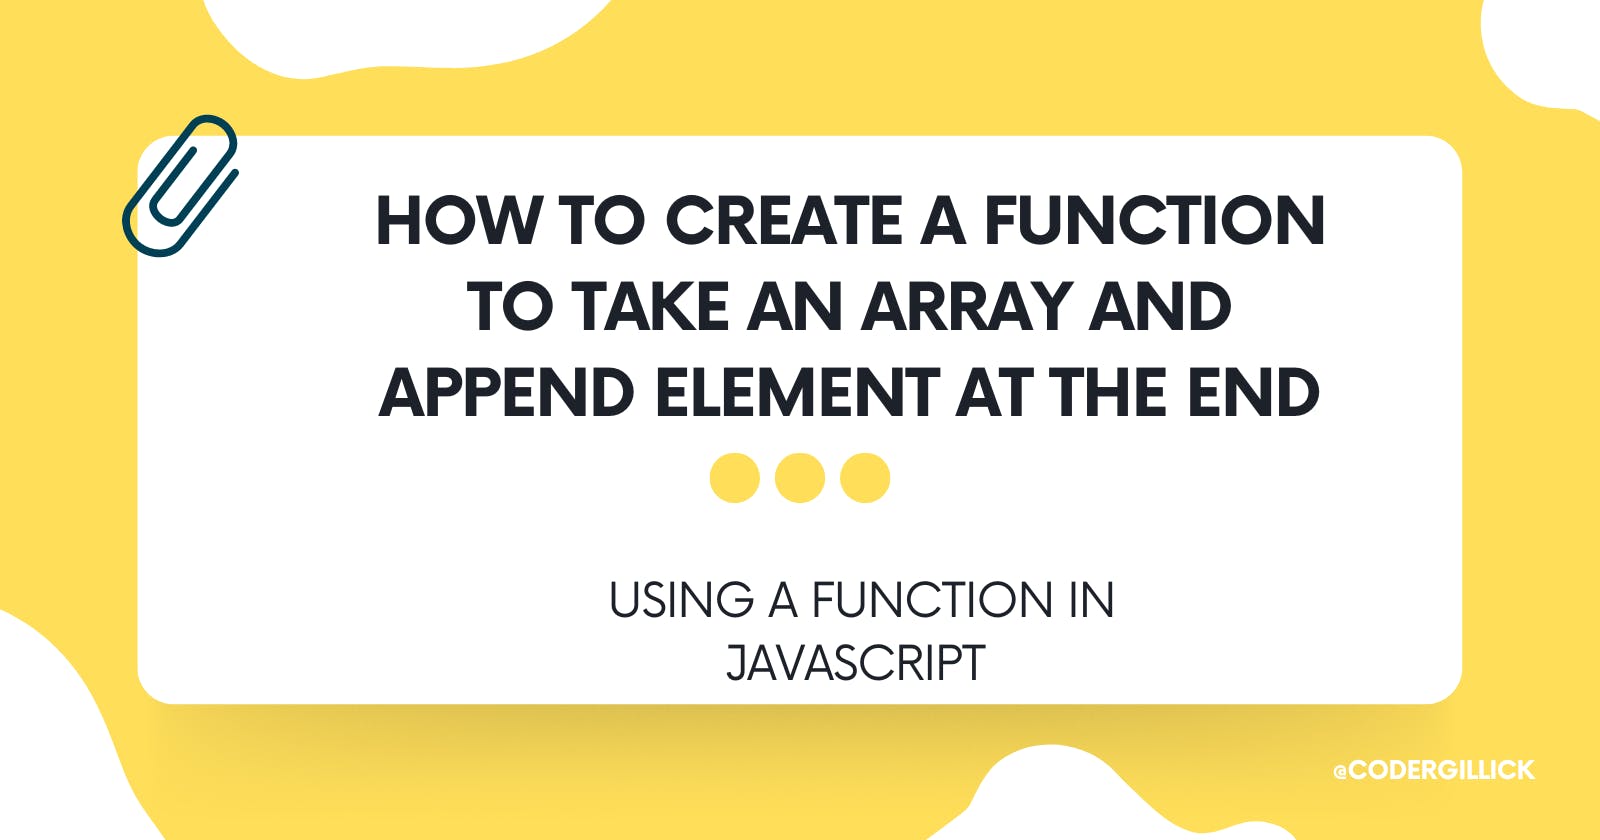 How to create a function to take an array and append an element at the end.